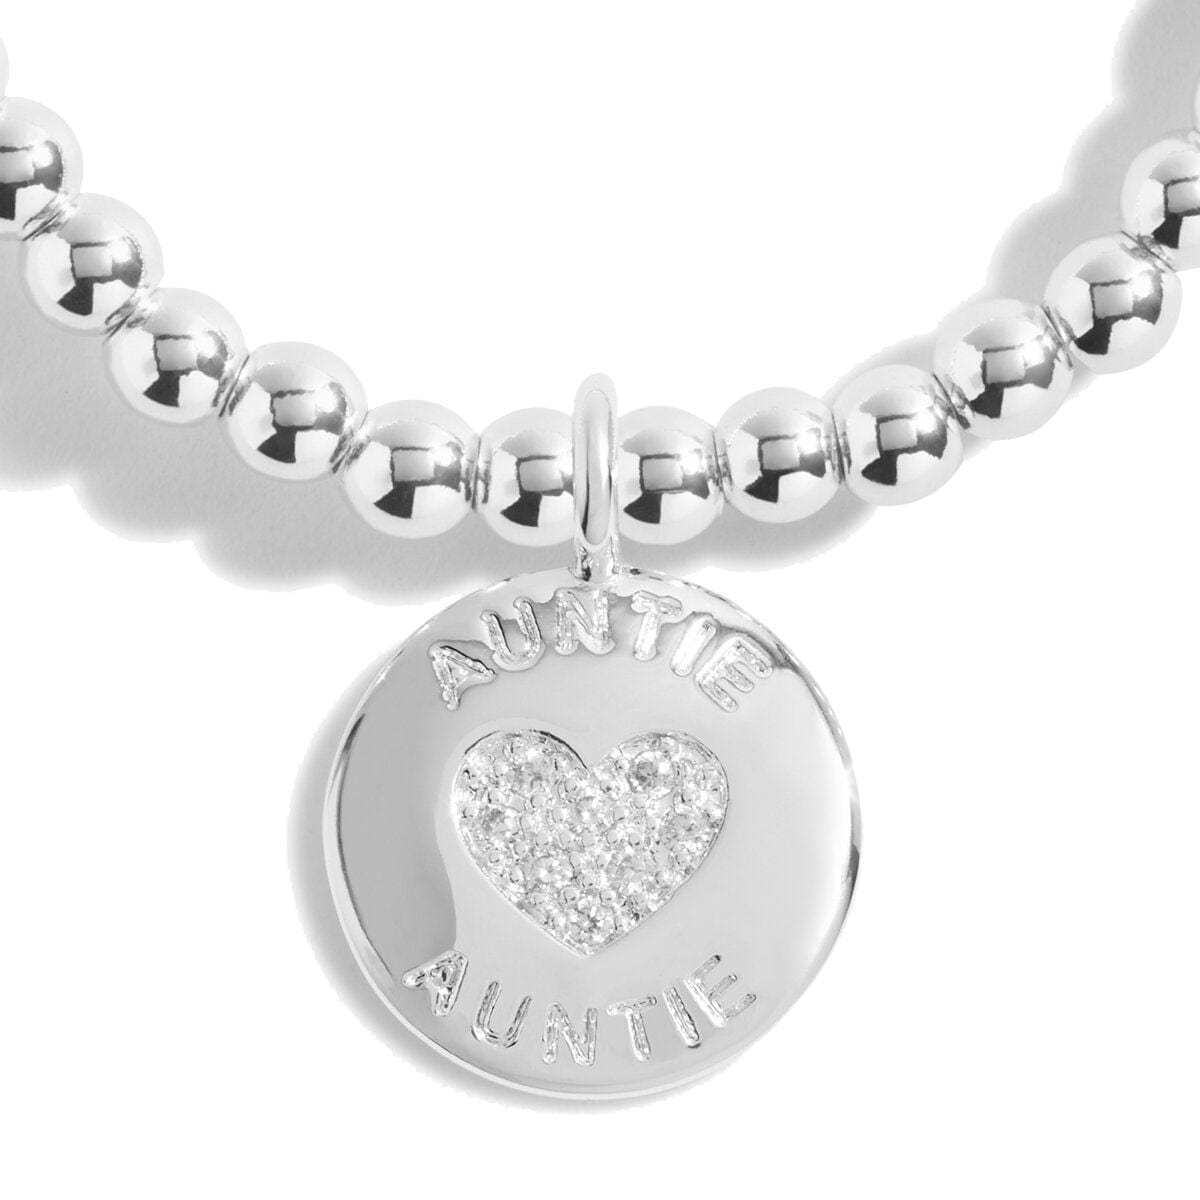 Joma Jewellery Bracelets Joma Jewellery Bracelet - A little Just For You Auntie